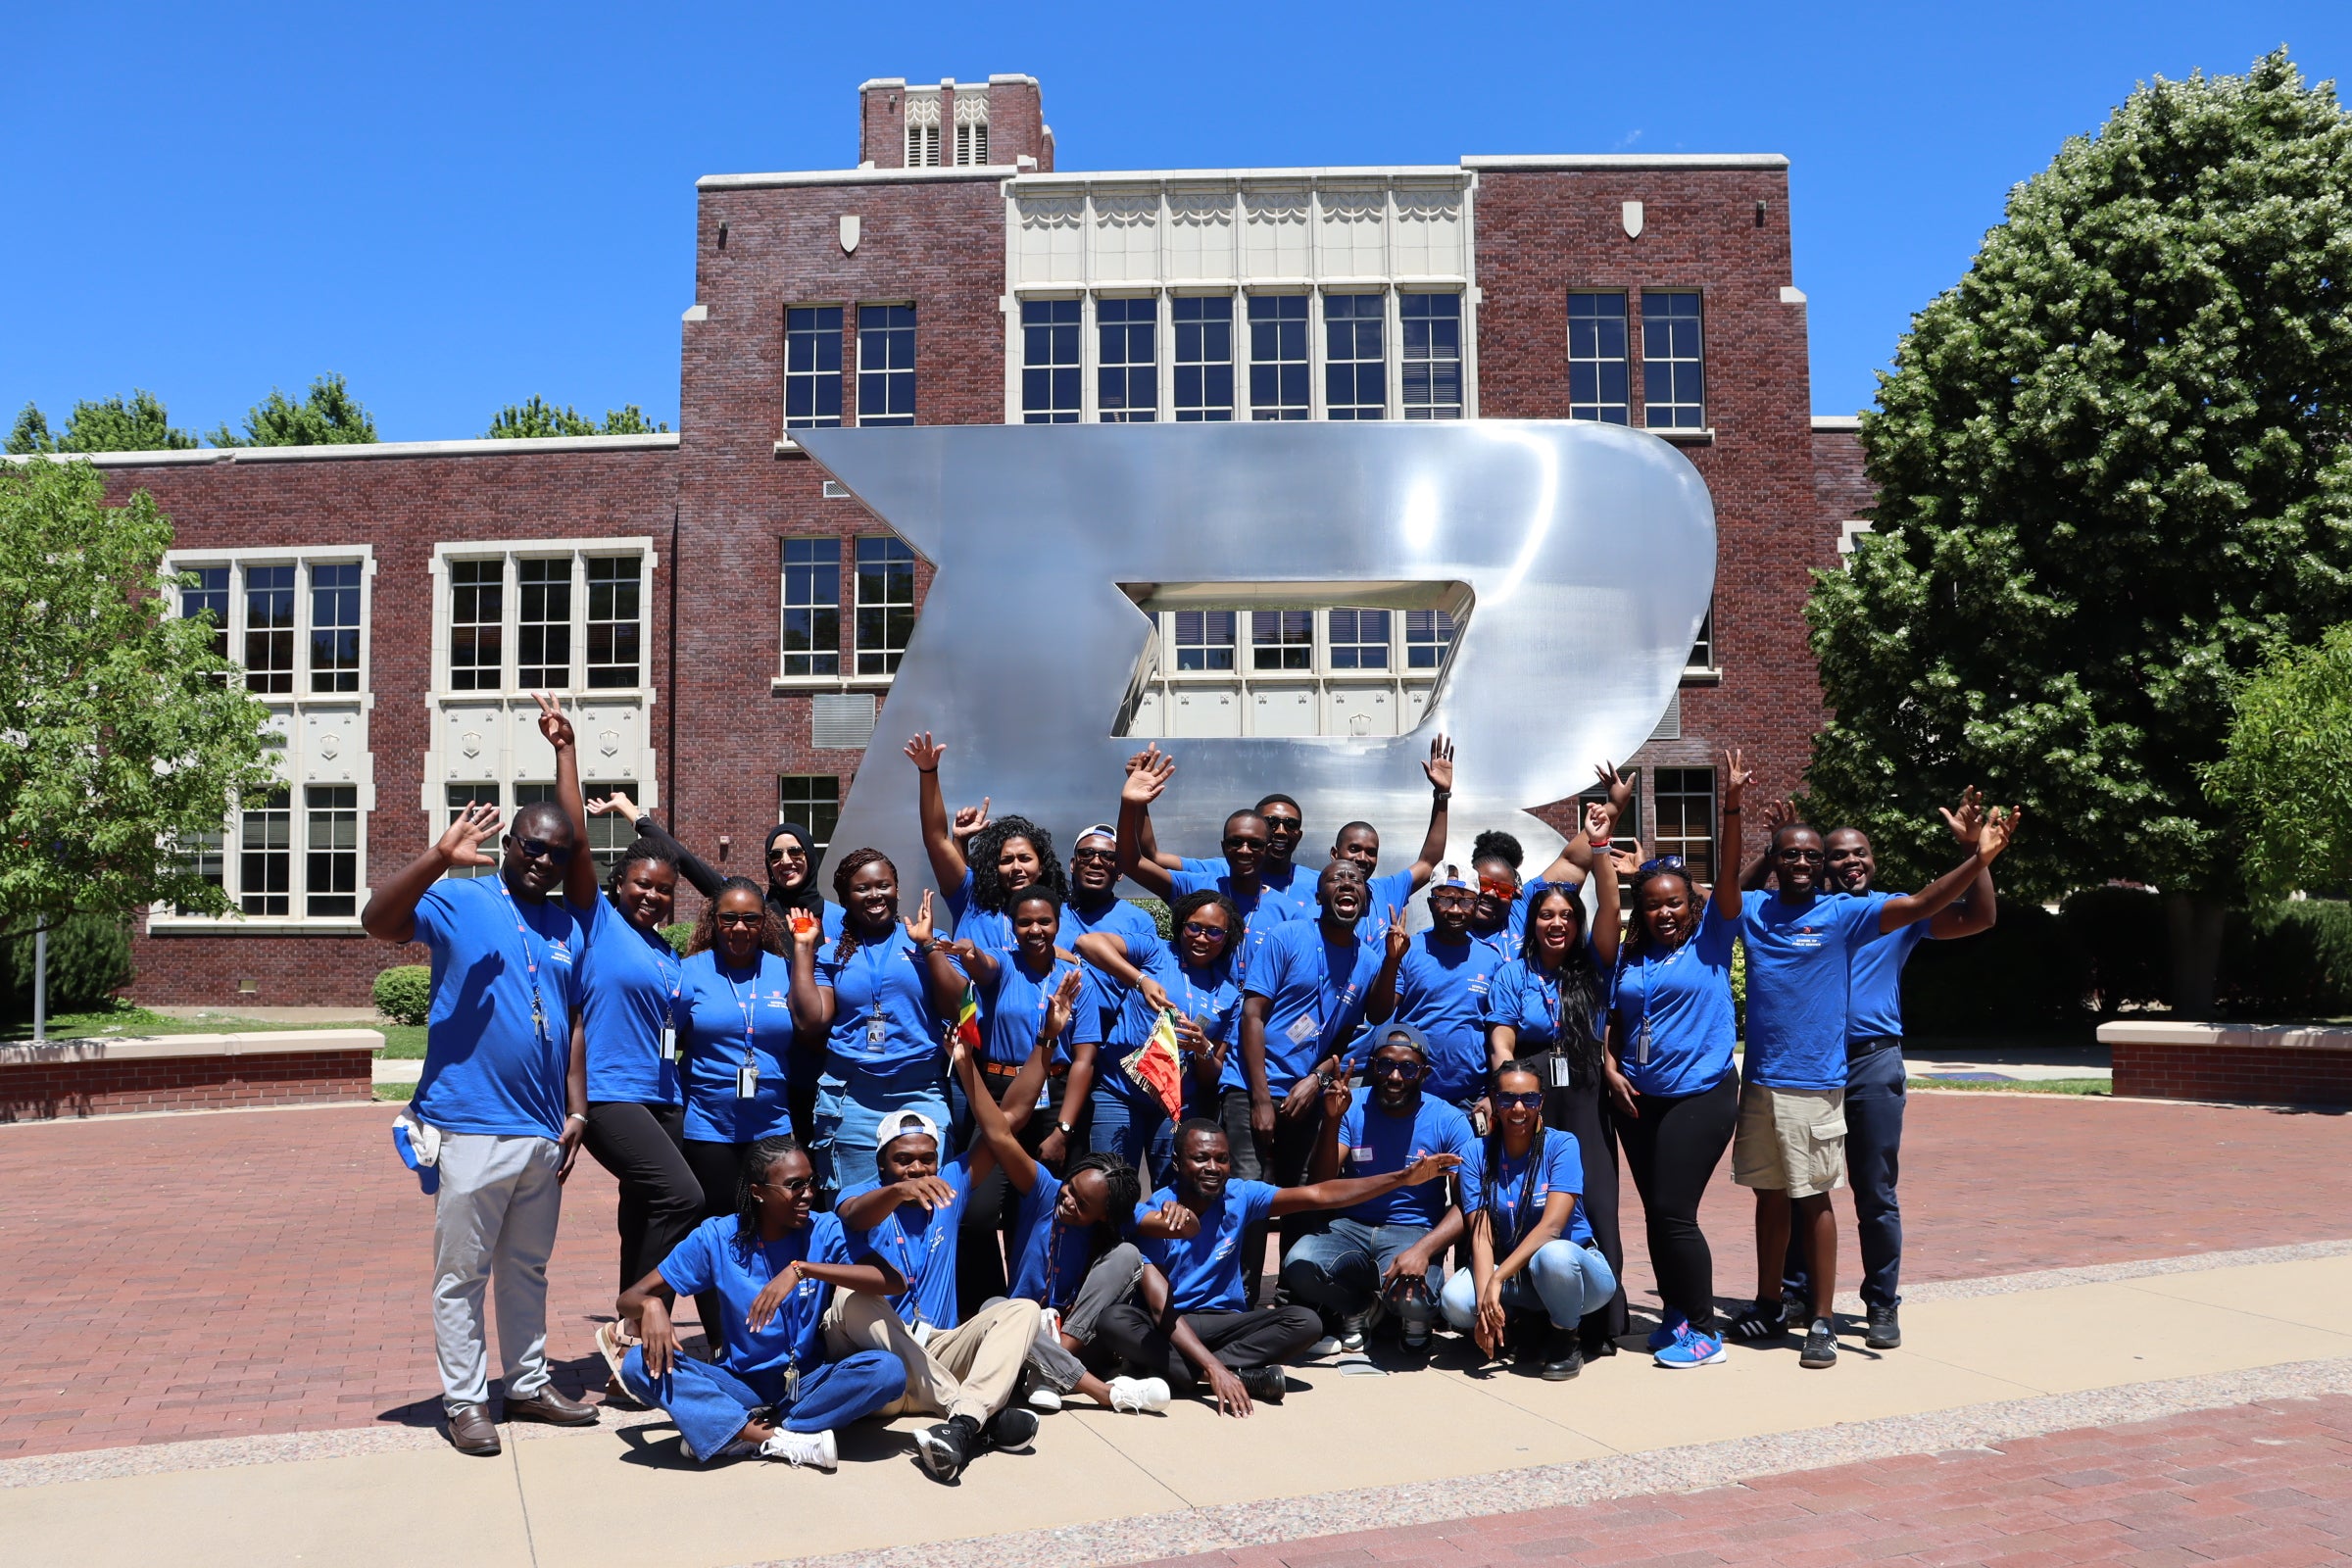 A group of persons pose in front of the Boise B statue